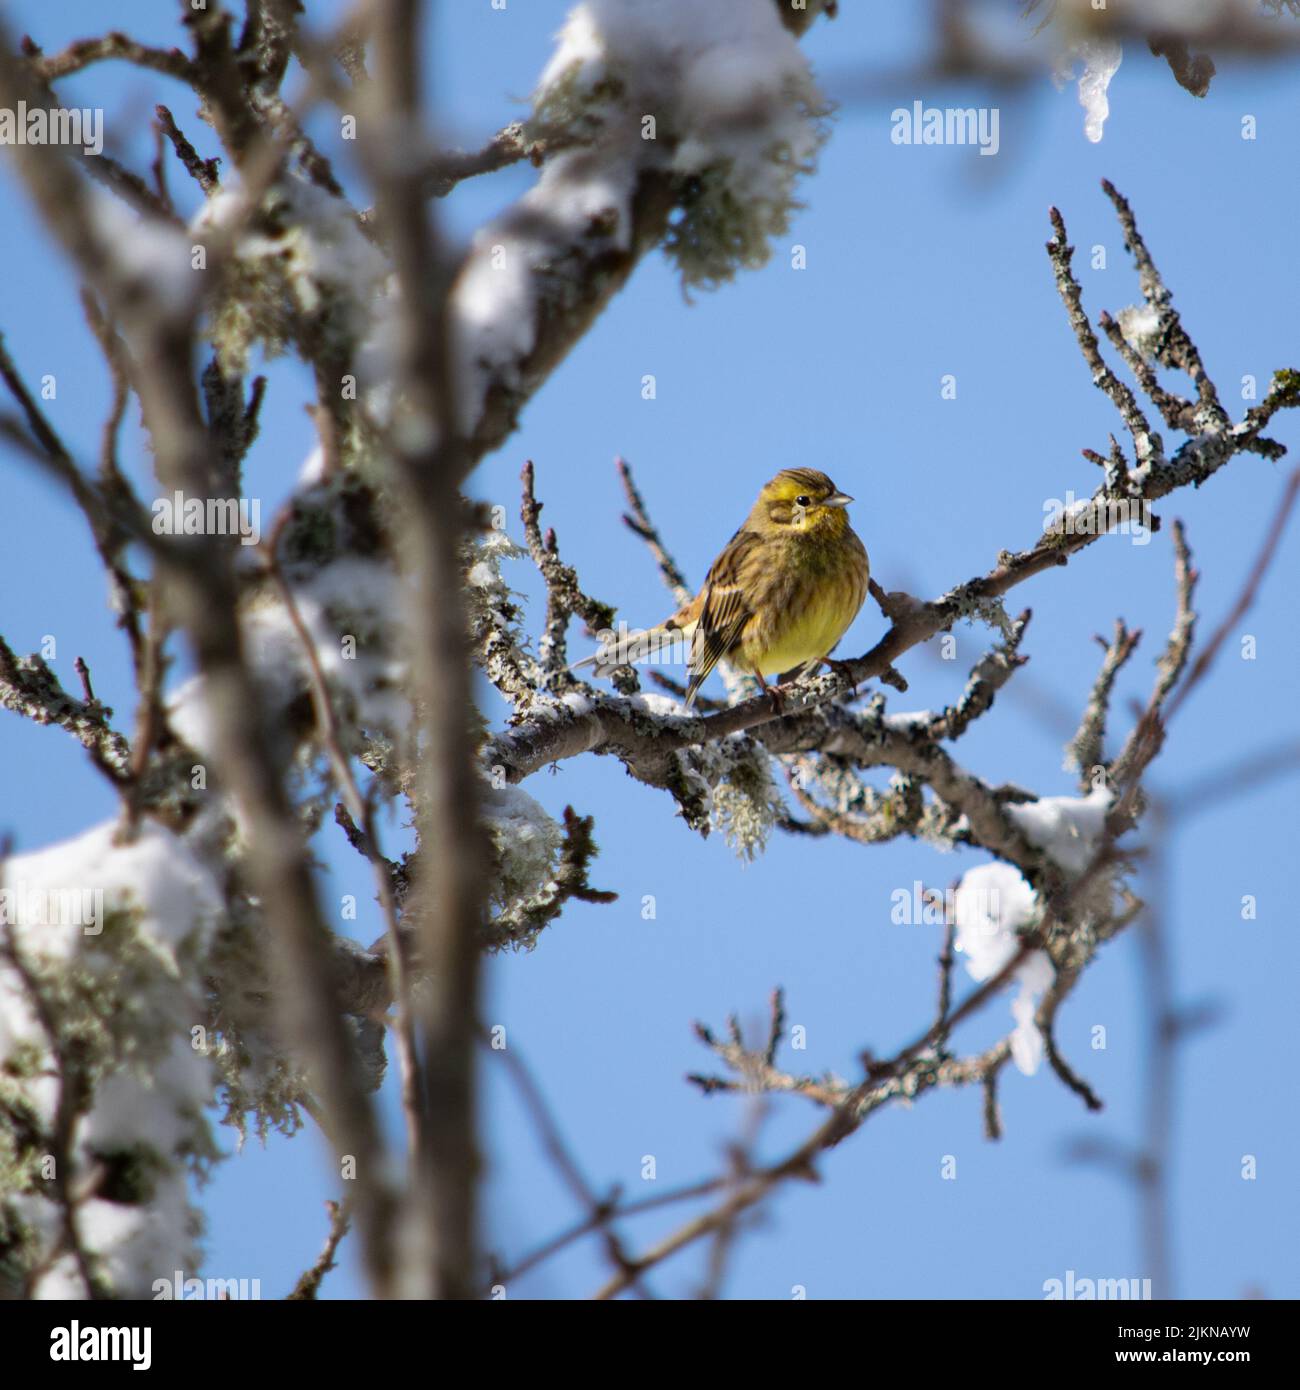 A close-up of a bright yellow ordinary oatmeal sitting on a tree branch in winter. Stock Photo